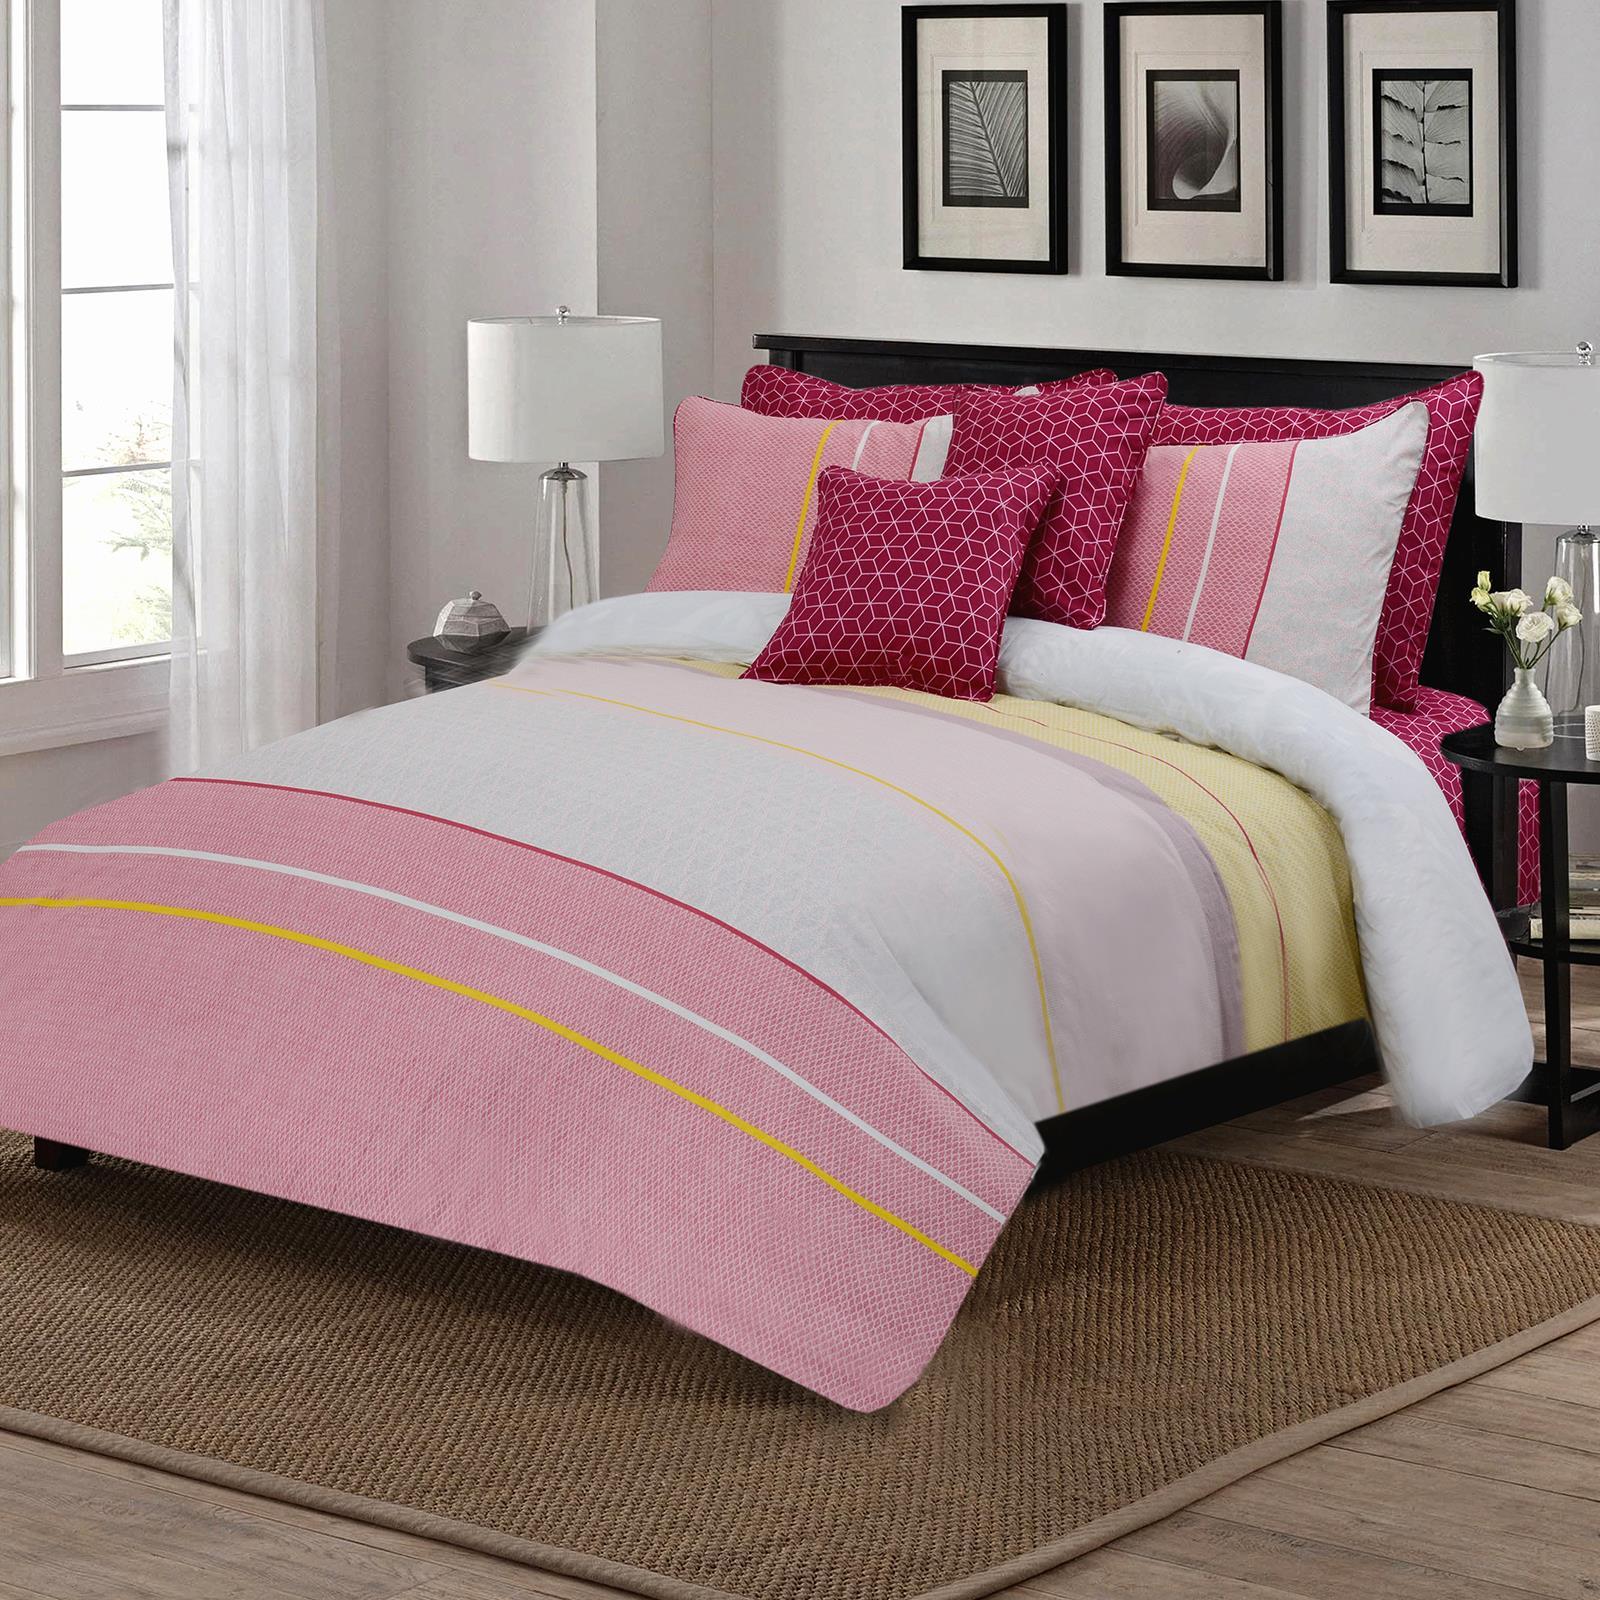 Madison Park bedding sets are made of which fabric?